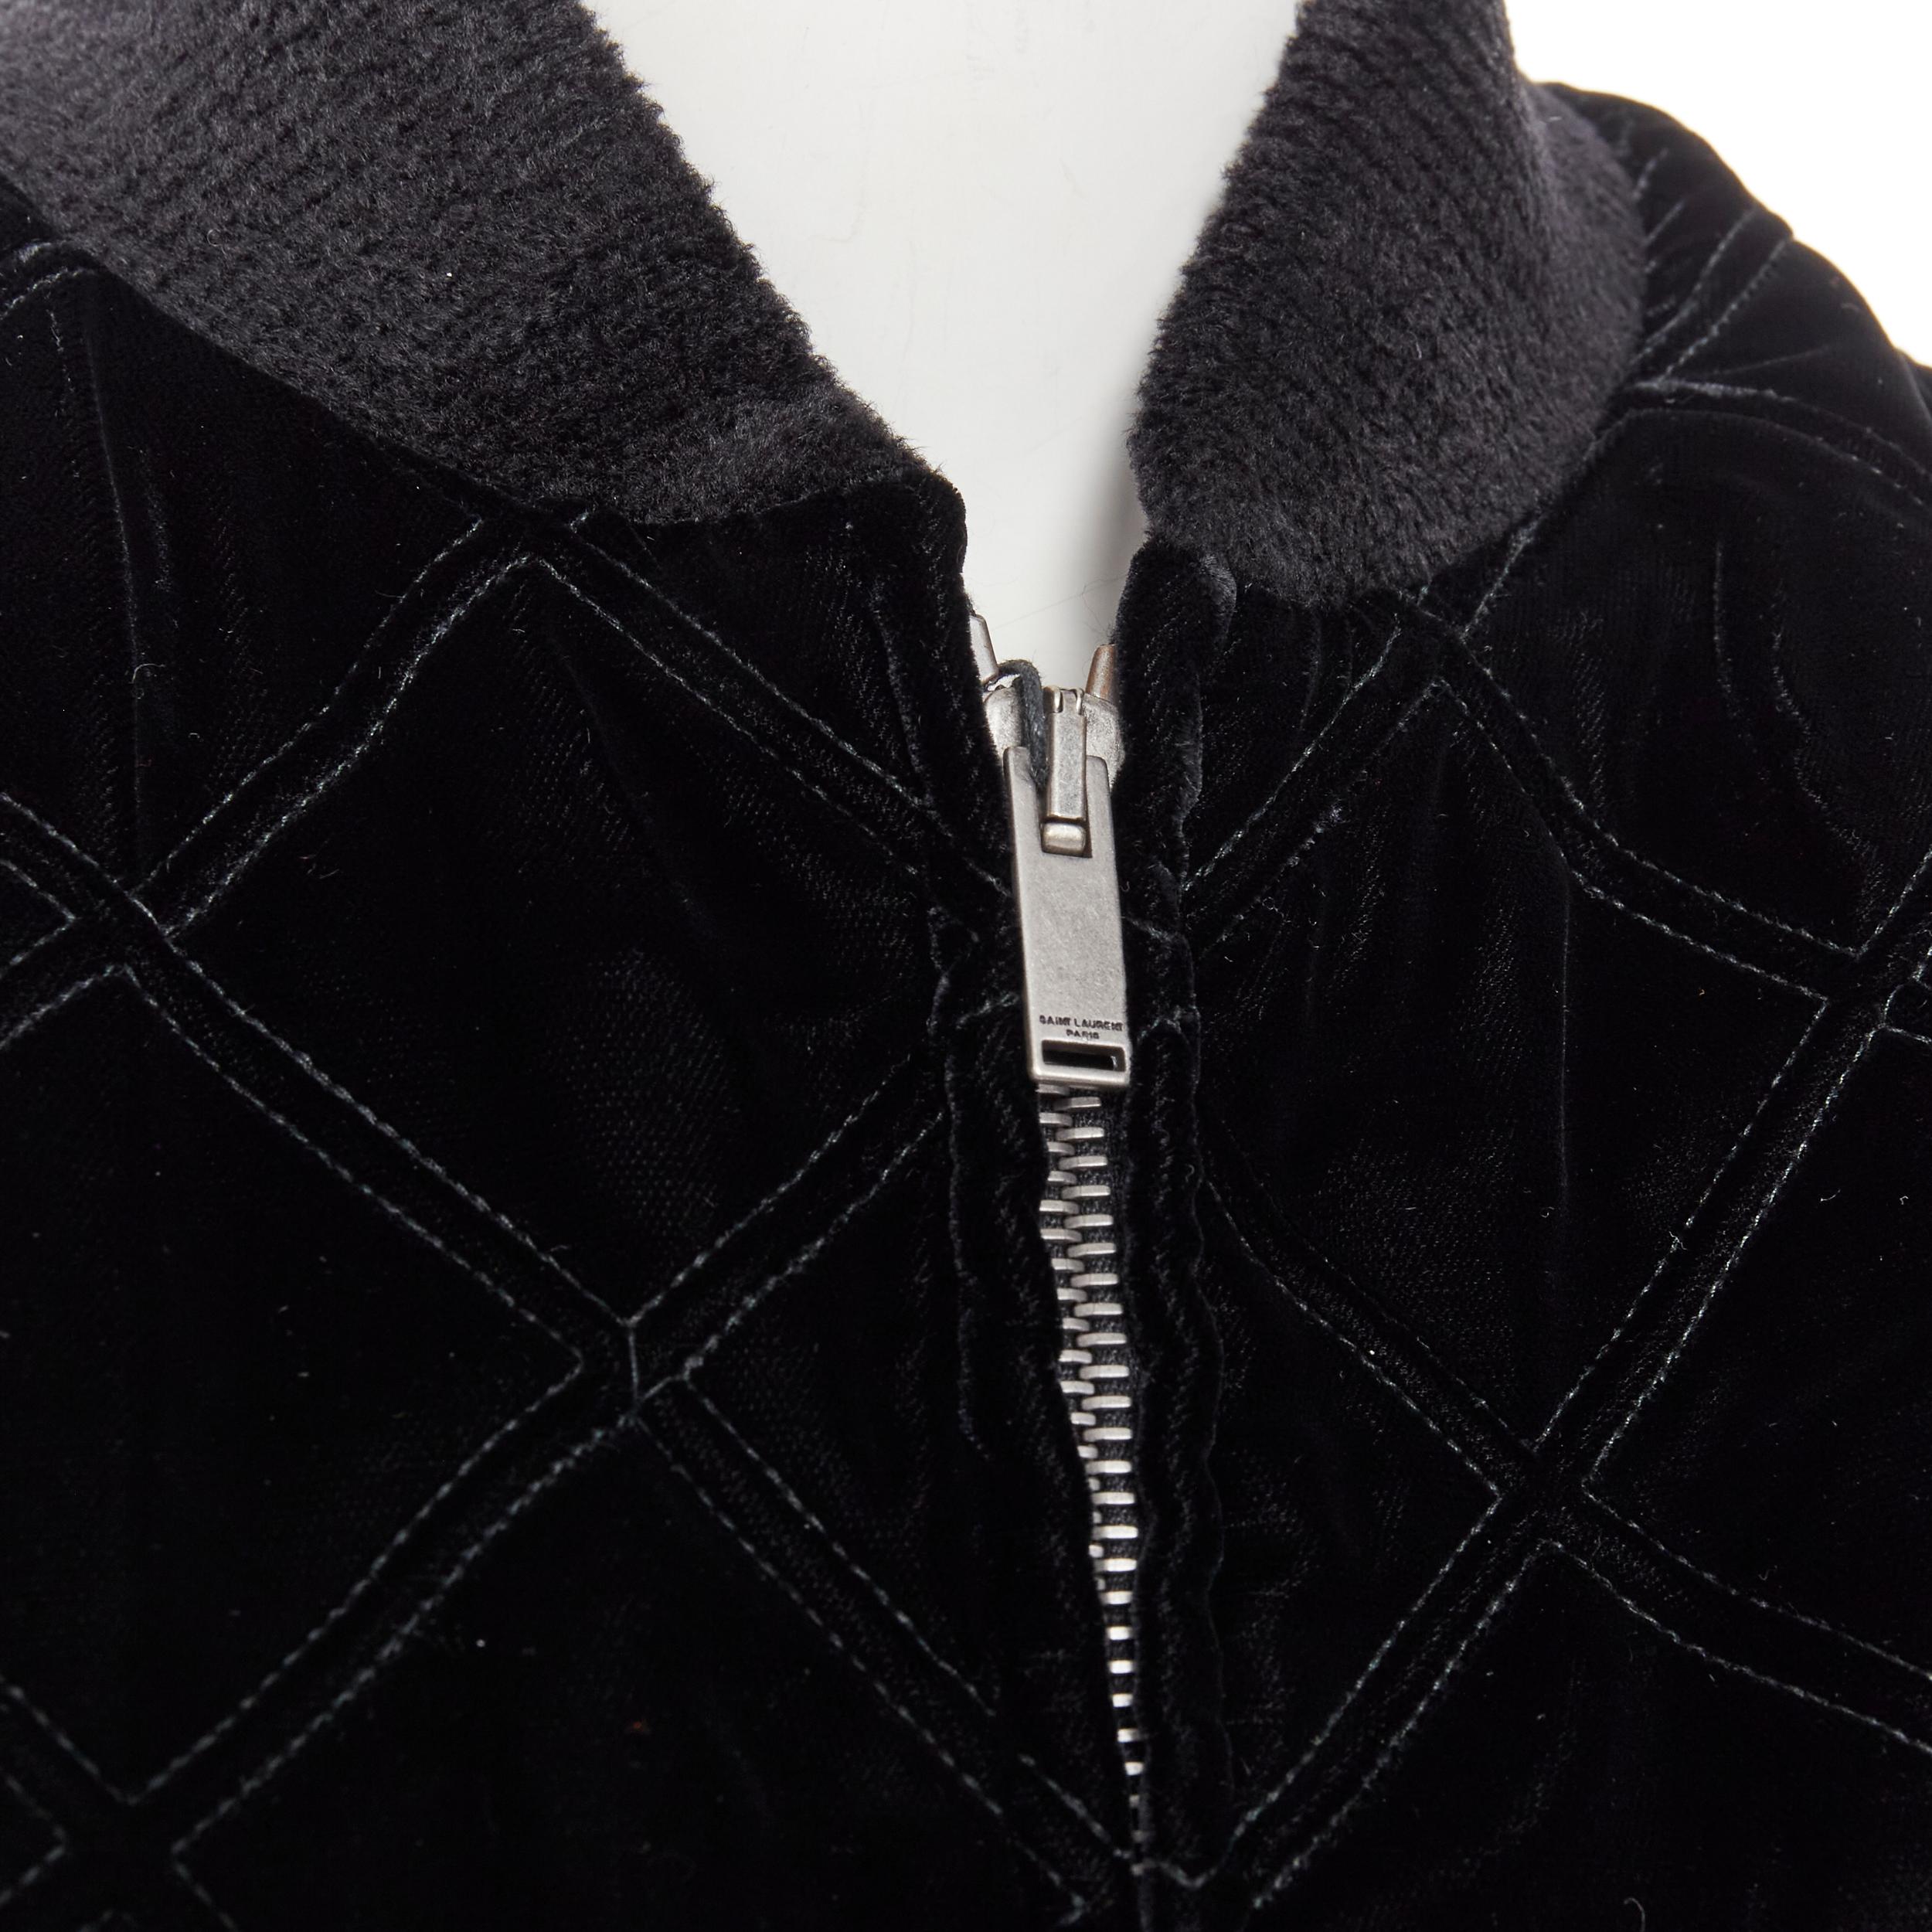 new SAINT LAURENT 2018 Teddy black purple diamond quilted bomber EU42 XXS 
Reference: TGAS/B01722
Brand: Saint Laurent 
Collection: 2018 
Material: Velvet 
Color: Black 
Pattern: Solid 
Closure: Zip 
Extra Detail: Please note this is a menswear